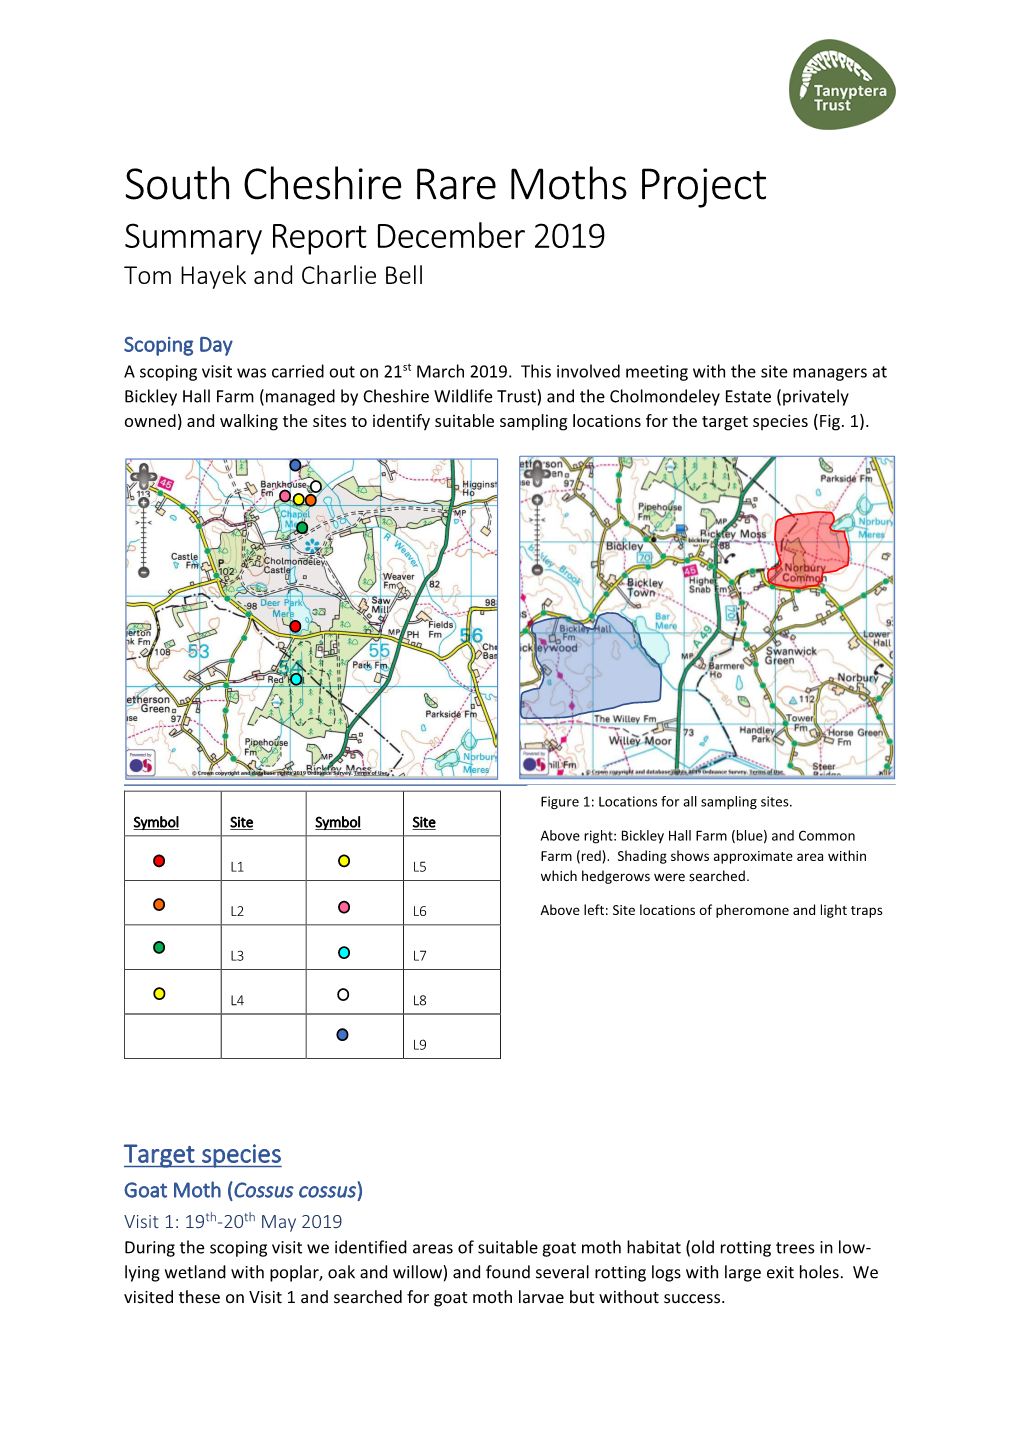 South Cheshire Rare Moths Project Summary Report December 2019 Tom Hayek and Charlie Bell